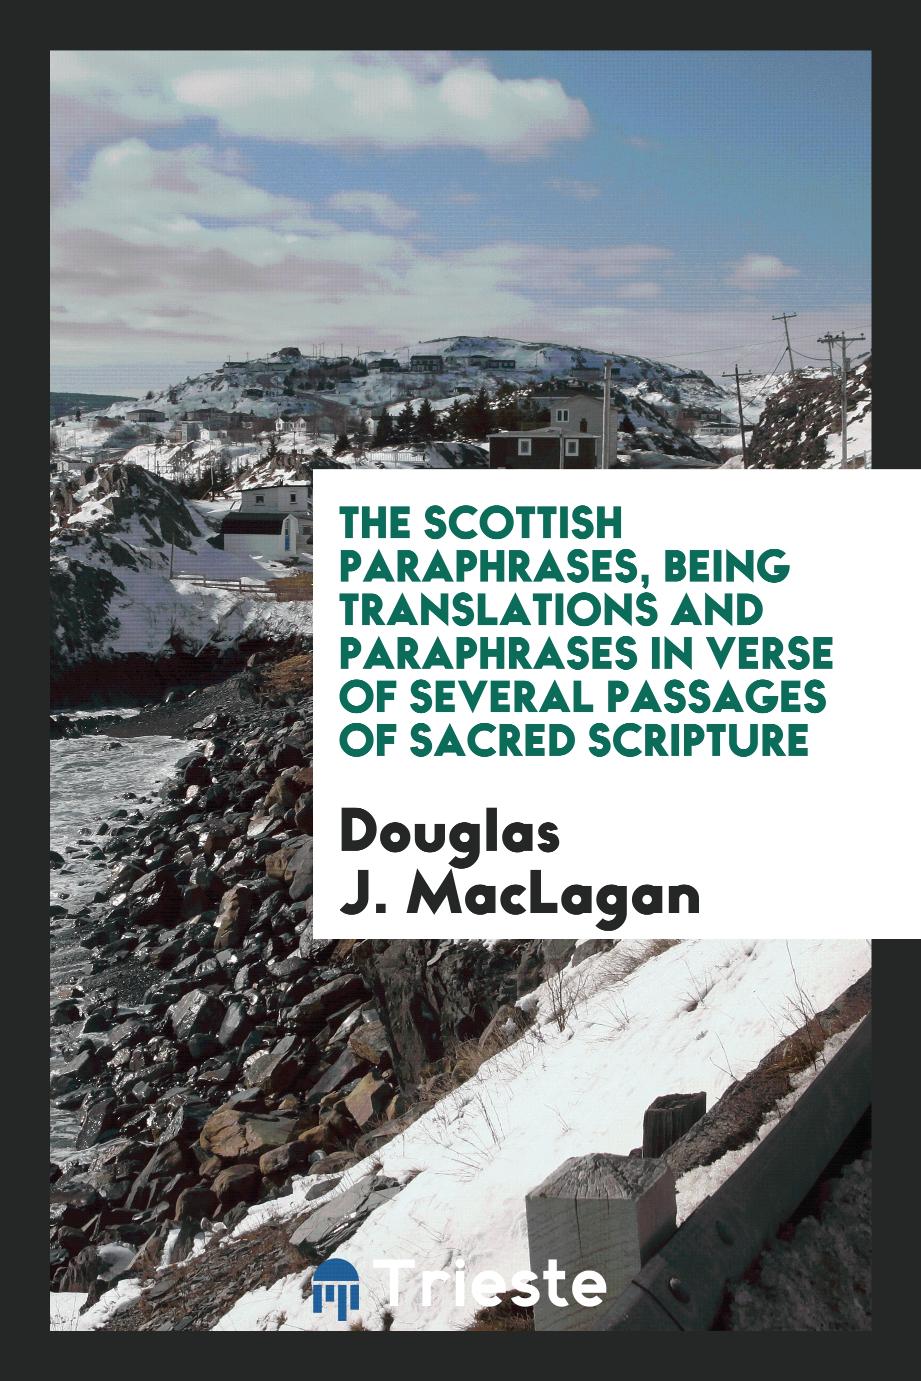 The Scottish paraphrases, being translations and paraphrases in verse of several passages of Sacred Scripture